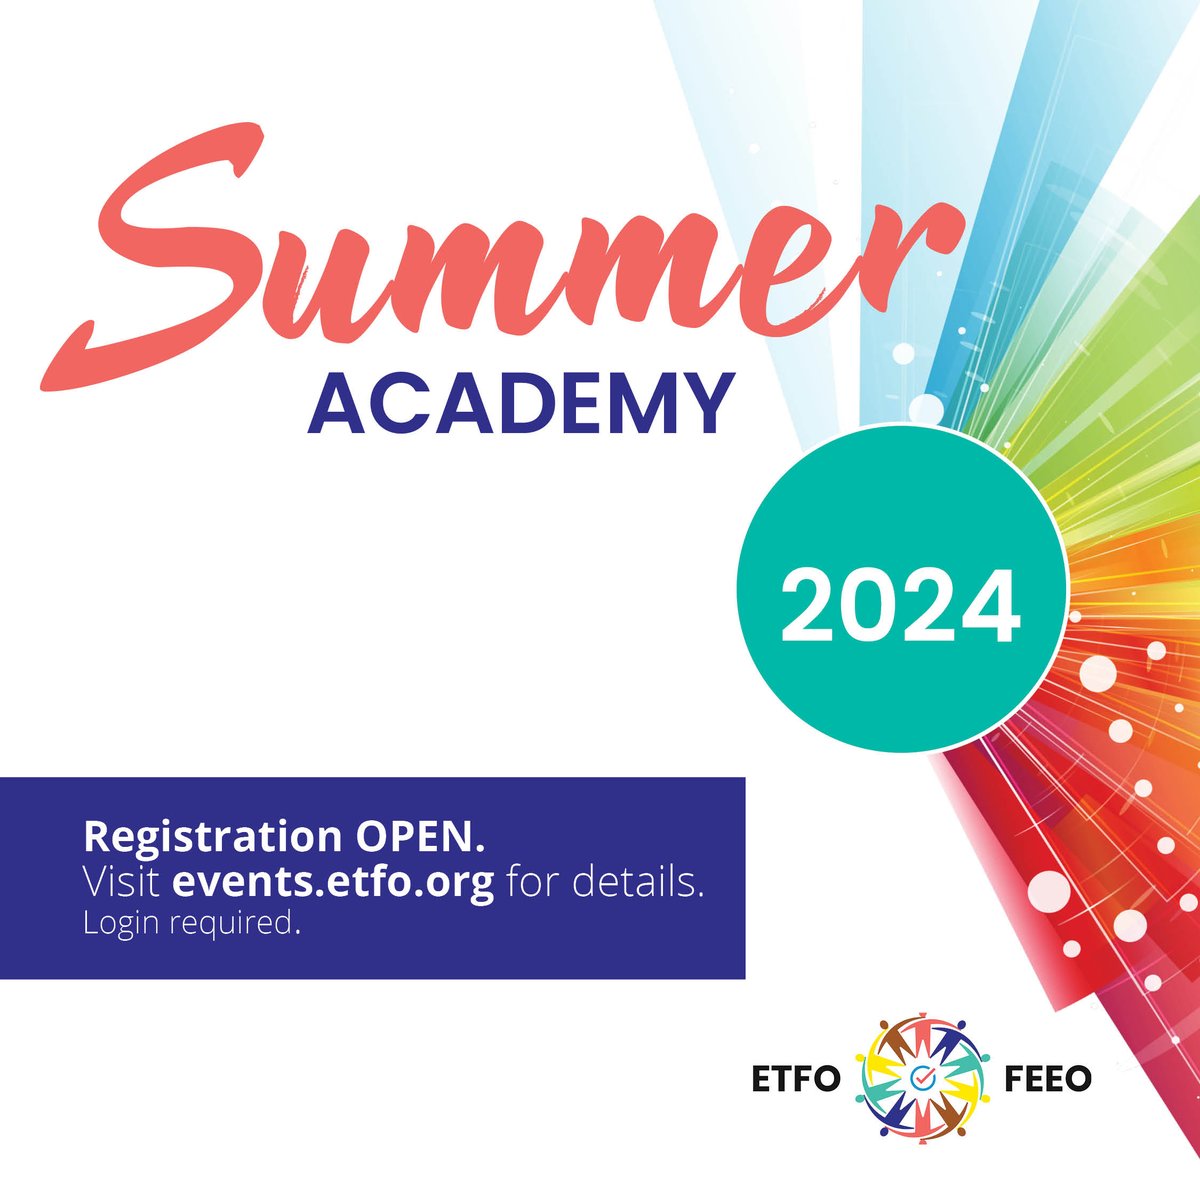 Registration is now open for Summer Academy. ETFO courses run in July and August. There are in-person courses at various locations across Ontario and virtual courses. Registration for in-person courses costs $75, and for virtual courses, $30. More at events.etfo.org